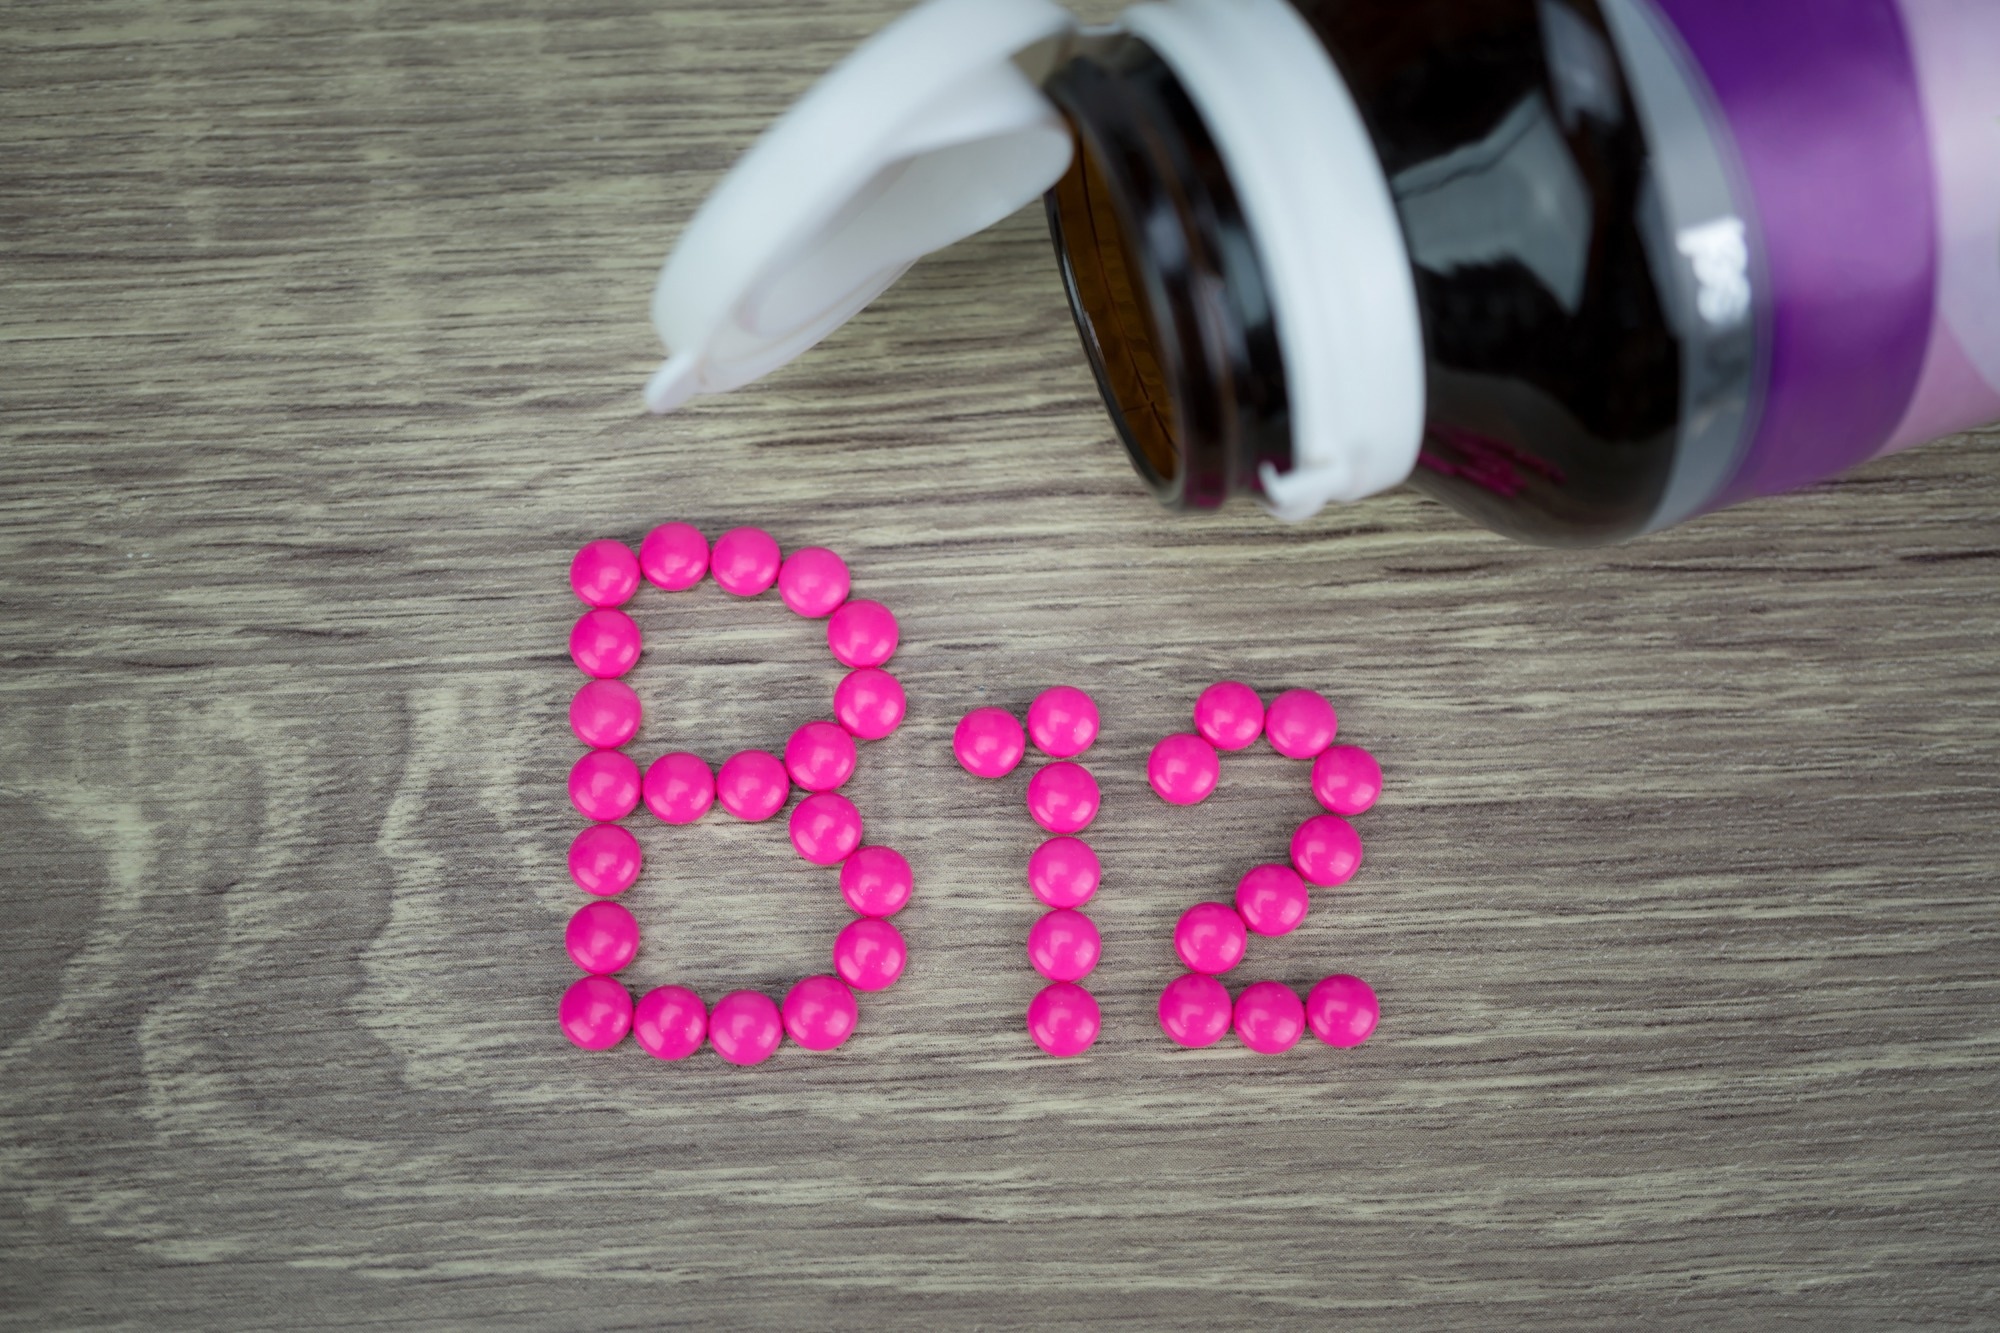 An evaluation of the effect of maternal vitamin B12 supplementation on postpartum infant growth and neurodevelopment